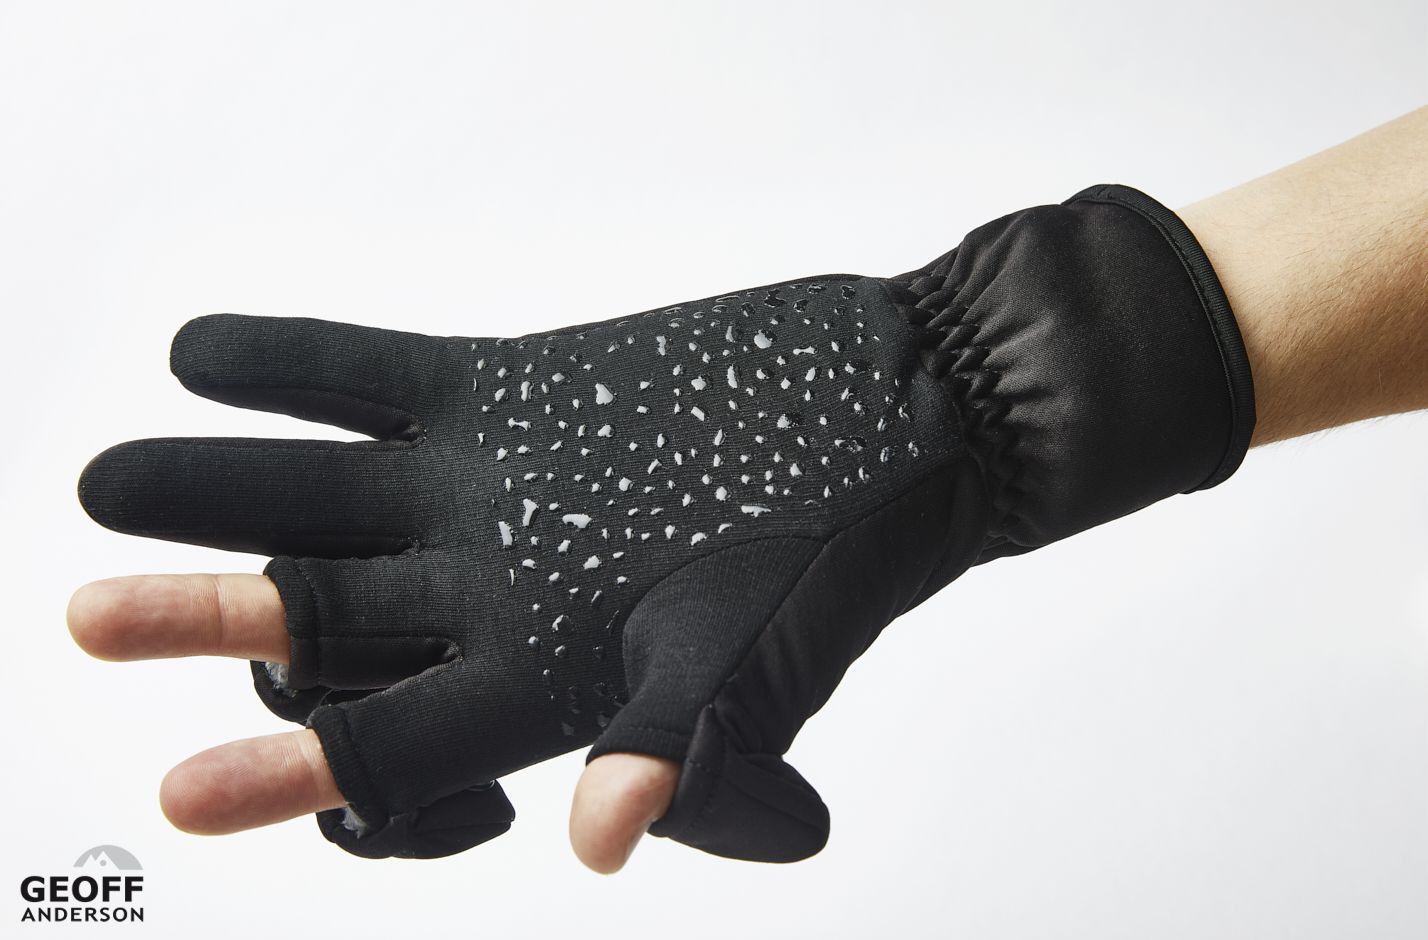 Advarsel magasin Oxide AirBear Weather Proof Glove - AirBear handsker - Geoff Anderson